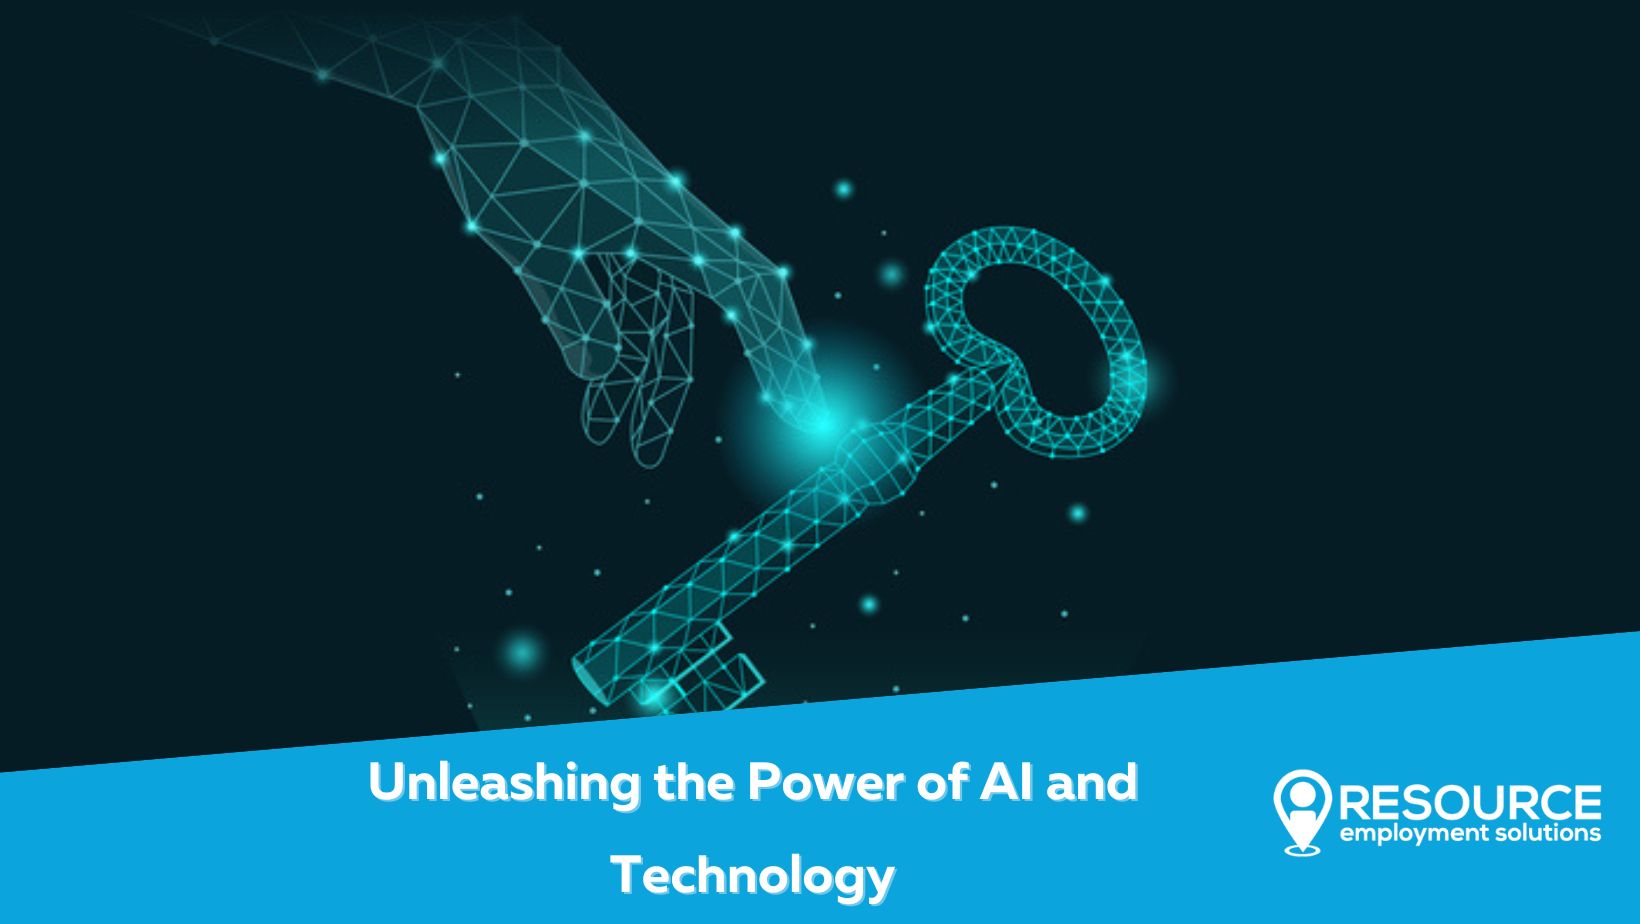 Unleashing the Power of AI and Technology: Partnering with Resource Employment Solutions